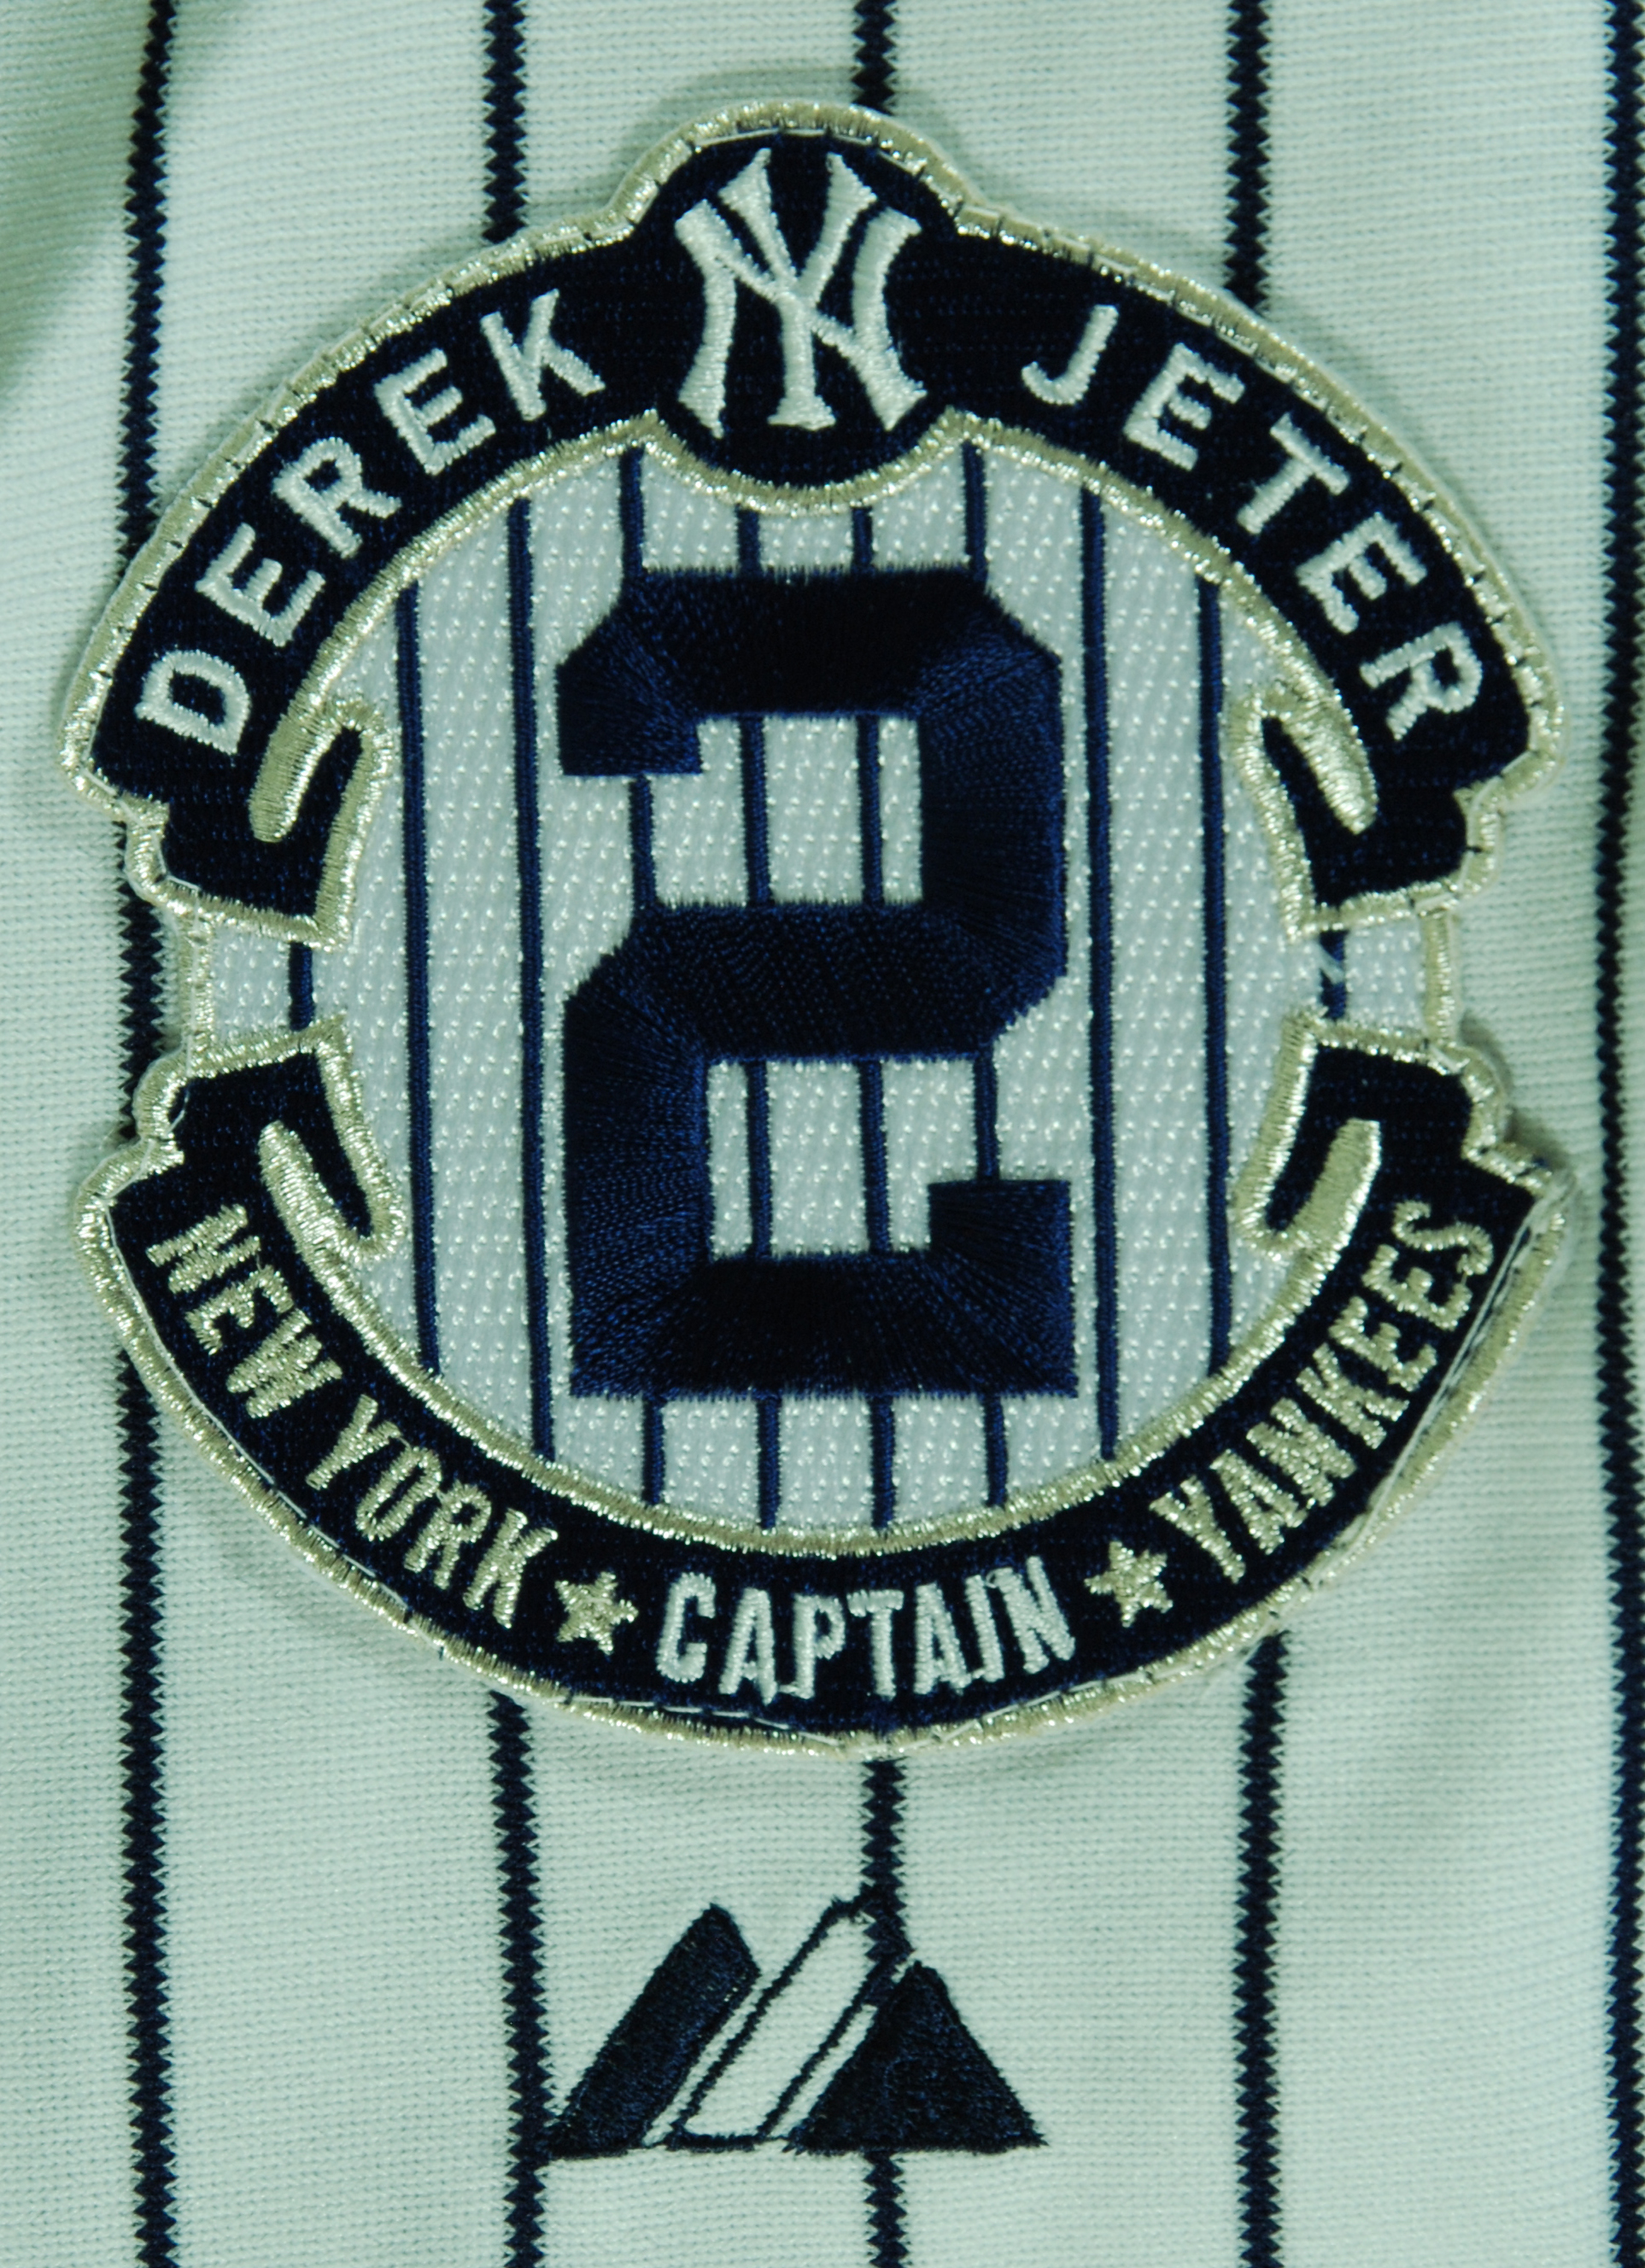 2012 Derek Jeter Game Used & Signed New York Yankees Home Jersey (Mlb  Authenticated, Steiner & Jsa), Sotheby's & Goldin Auctions Present: A  Century of Champions, 2020